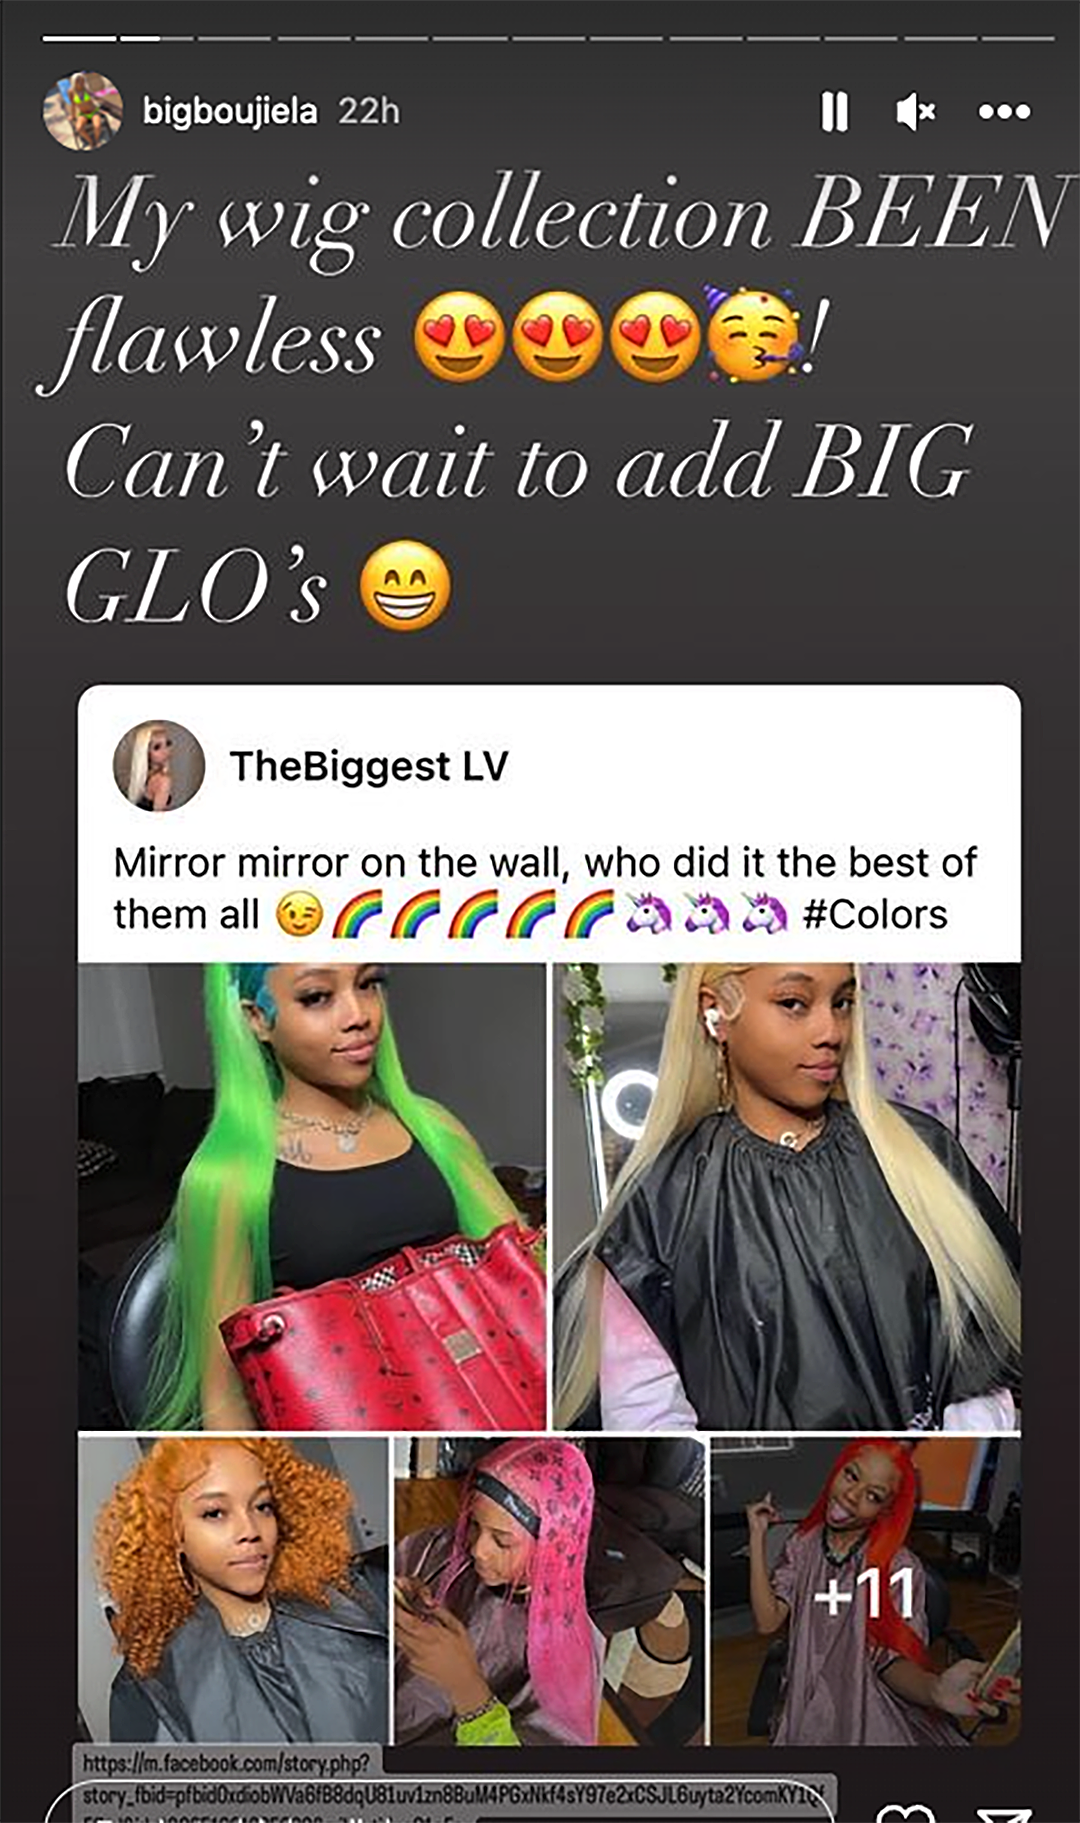 GloRilla Fan Who Caught the Rapper's Wig at Concert Goes Viral After Wearing It Herself, Glo Responds - Watch